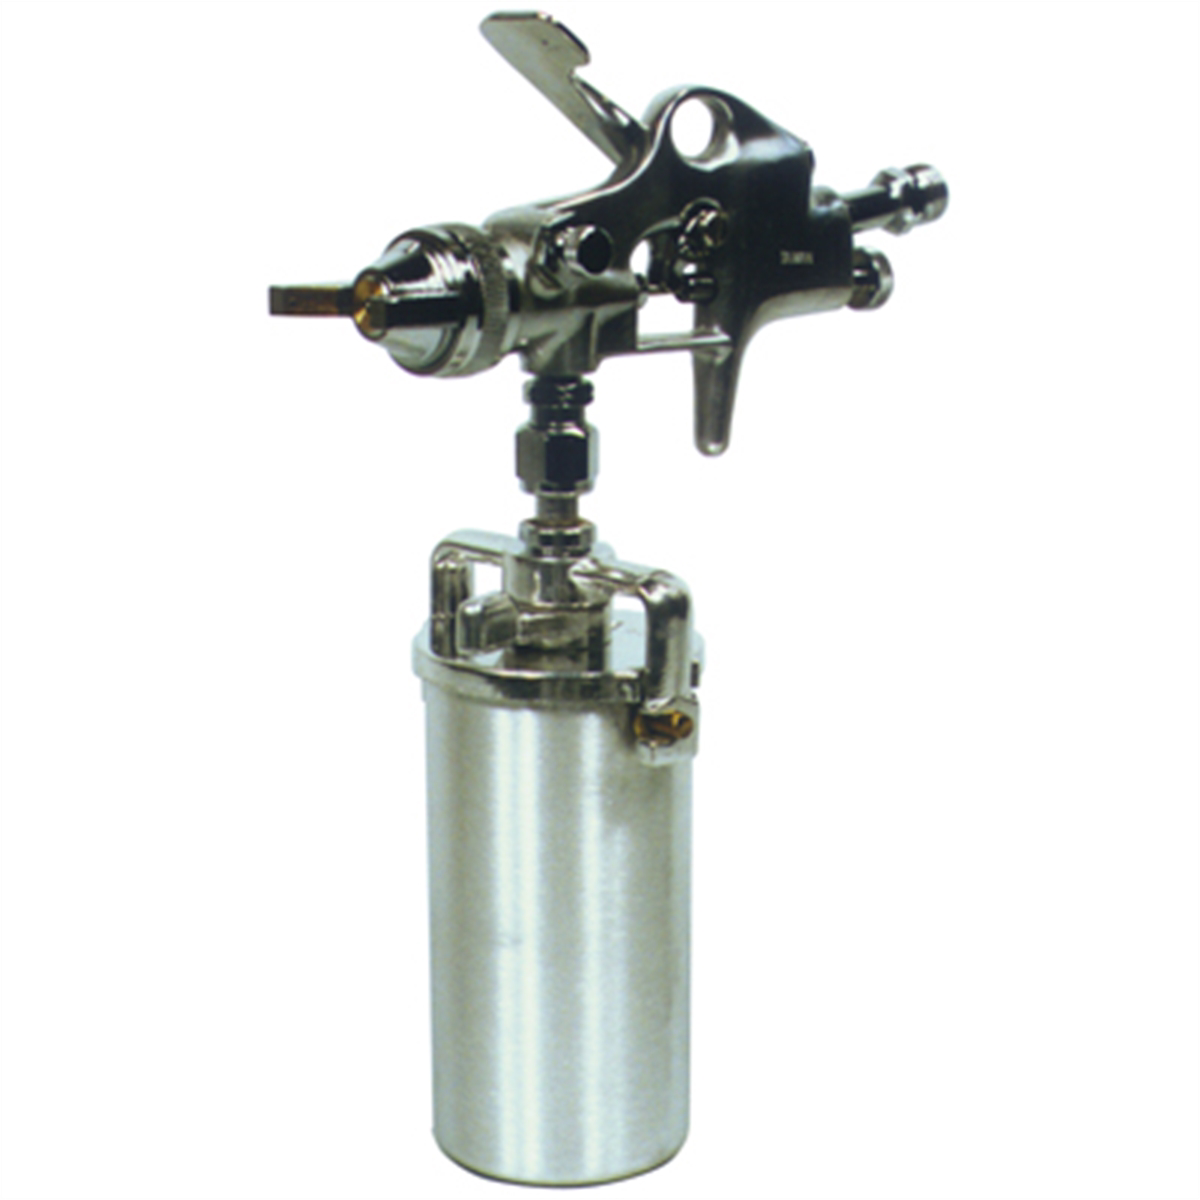 Touch Up Gun with Cup - 1.4mm Nozzle